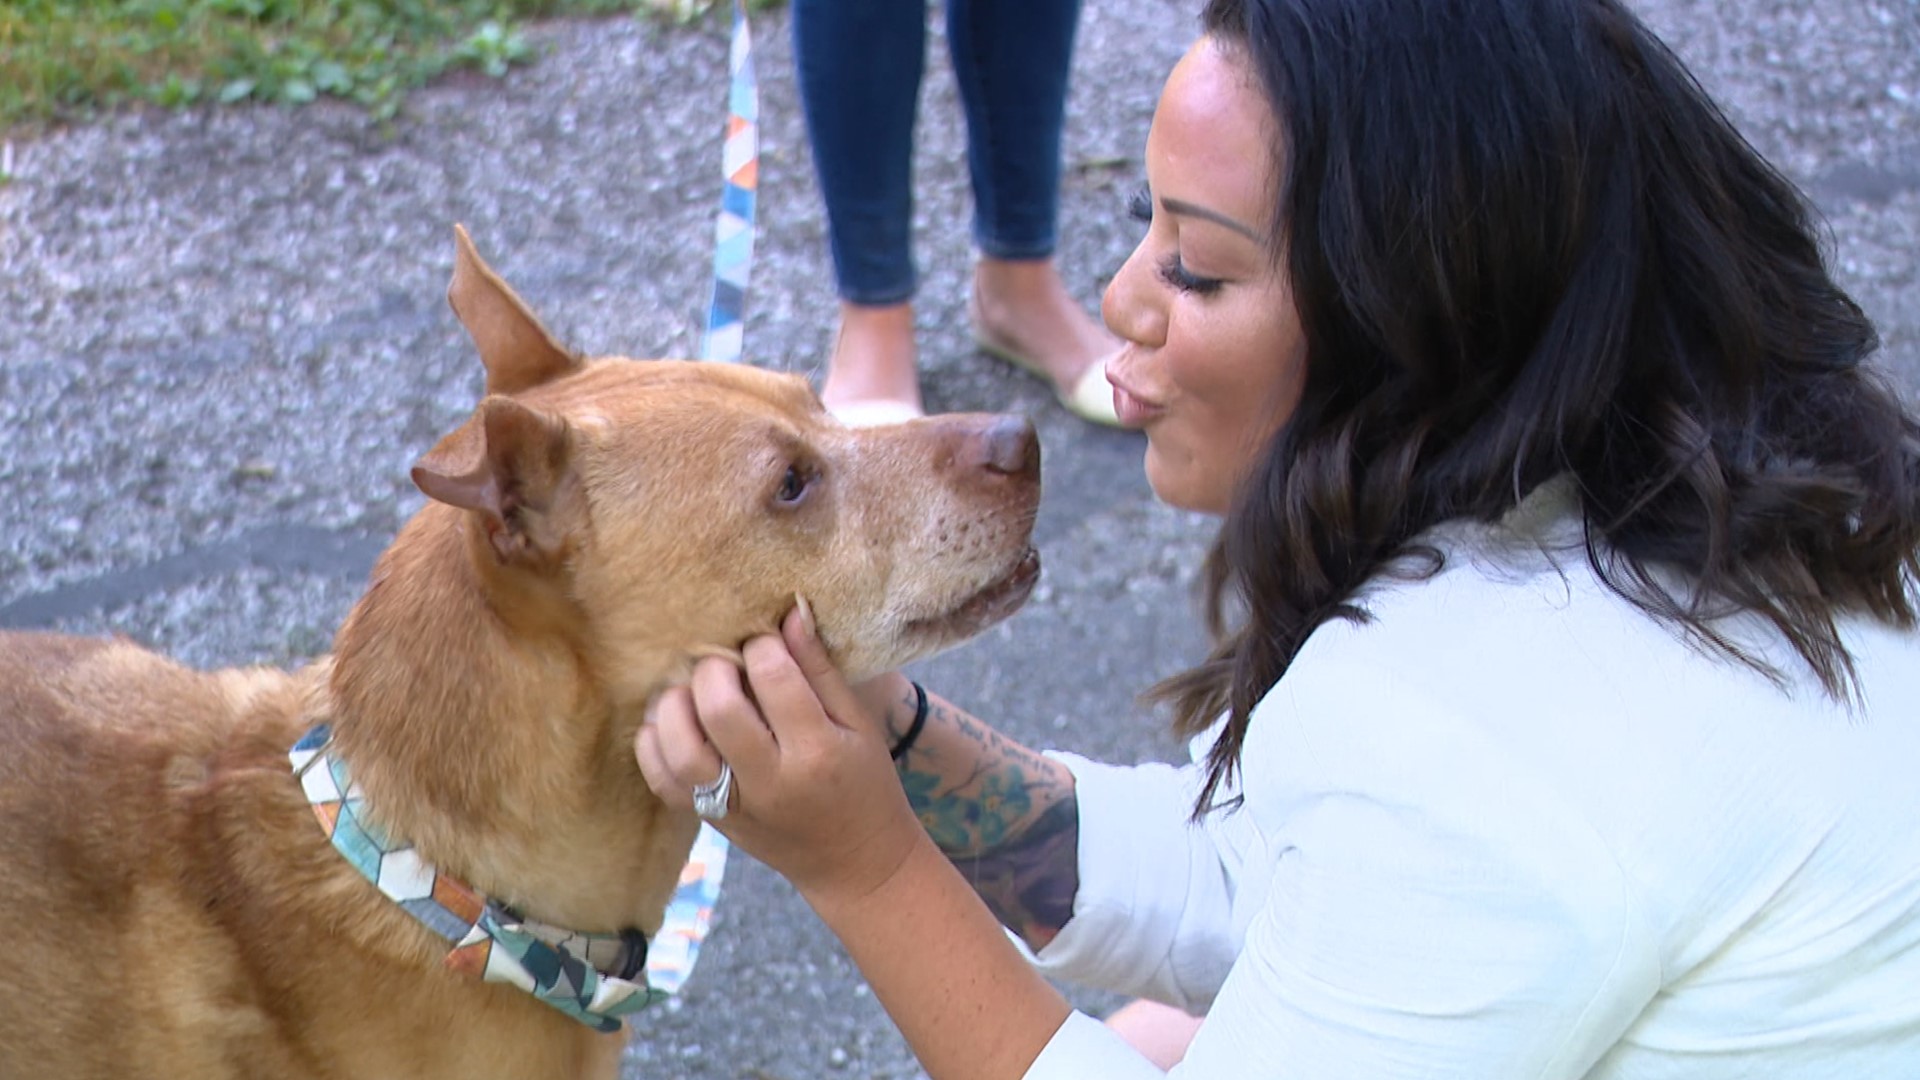 Samantha McAfee started the nonprofit after going through her own experience with a dog having cancer.